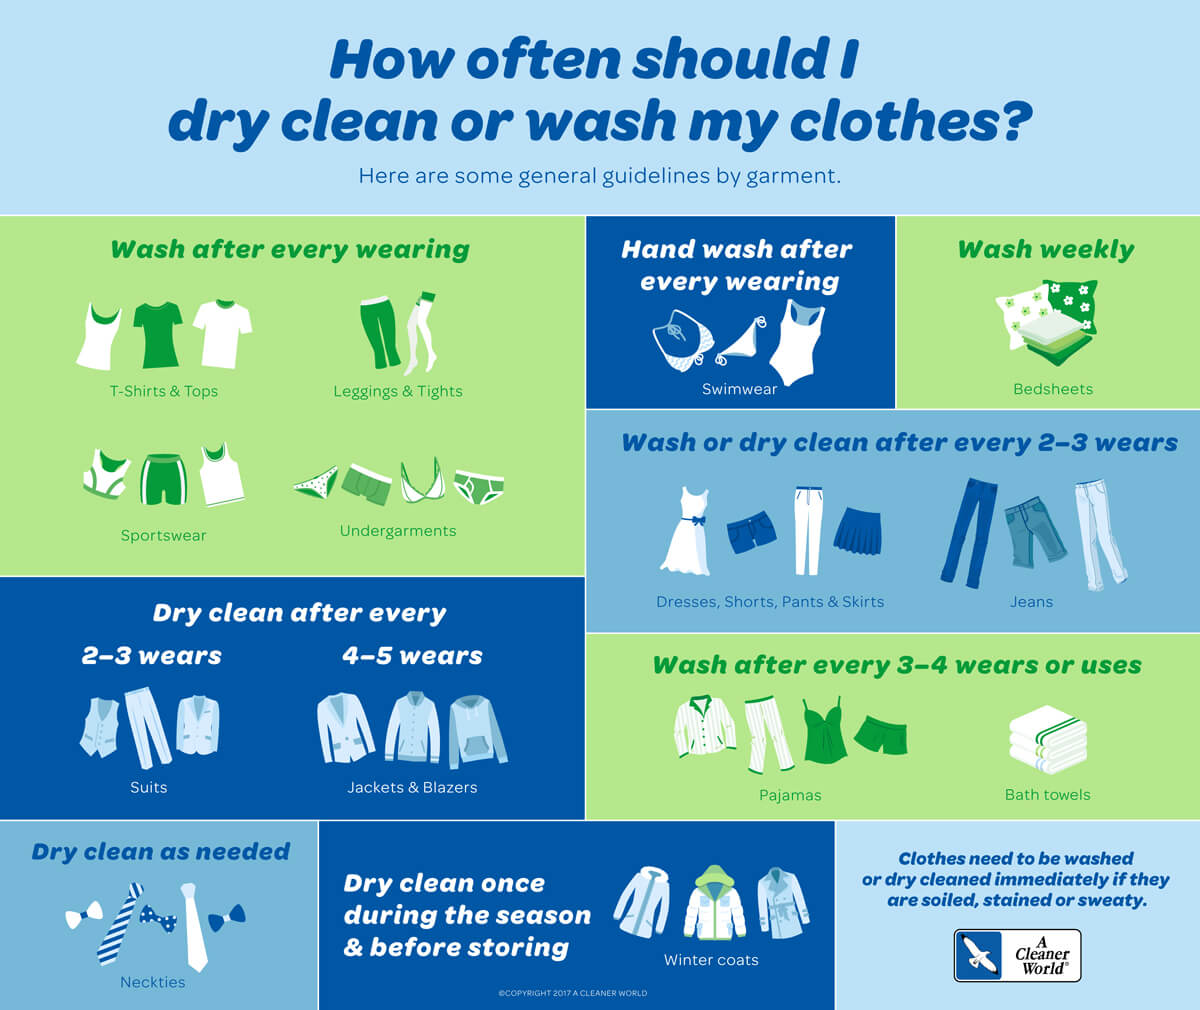 How Often to Dry Clean?